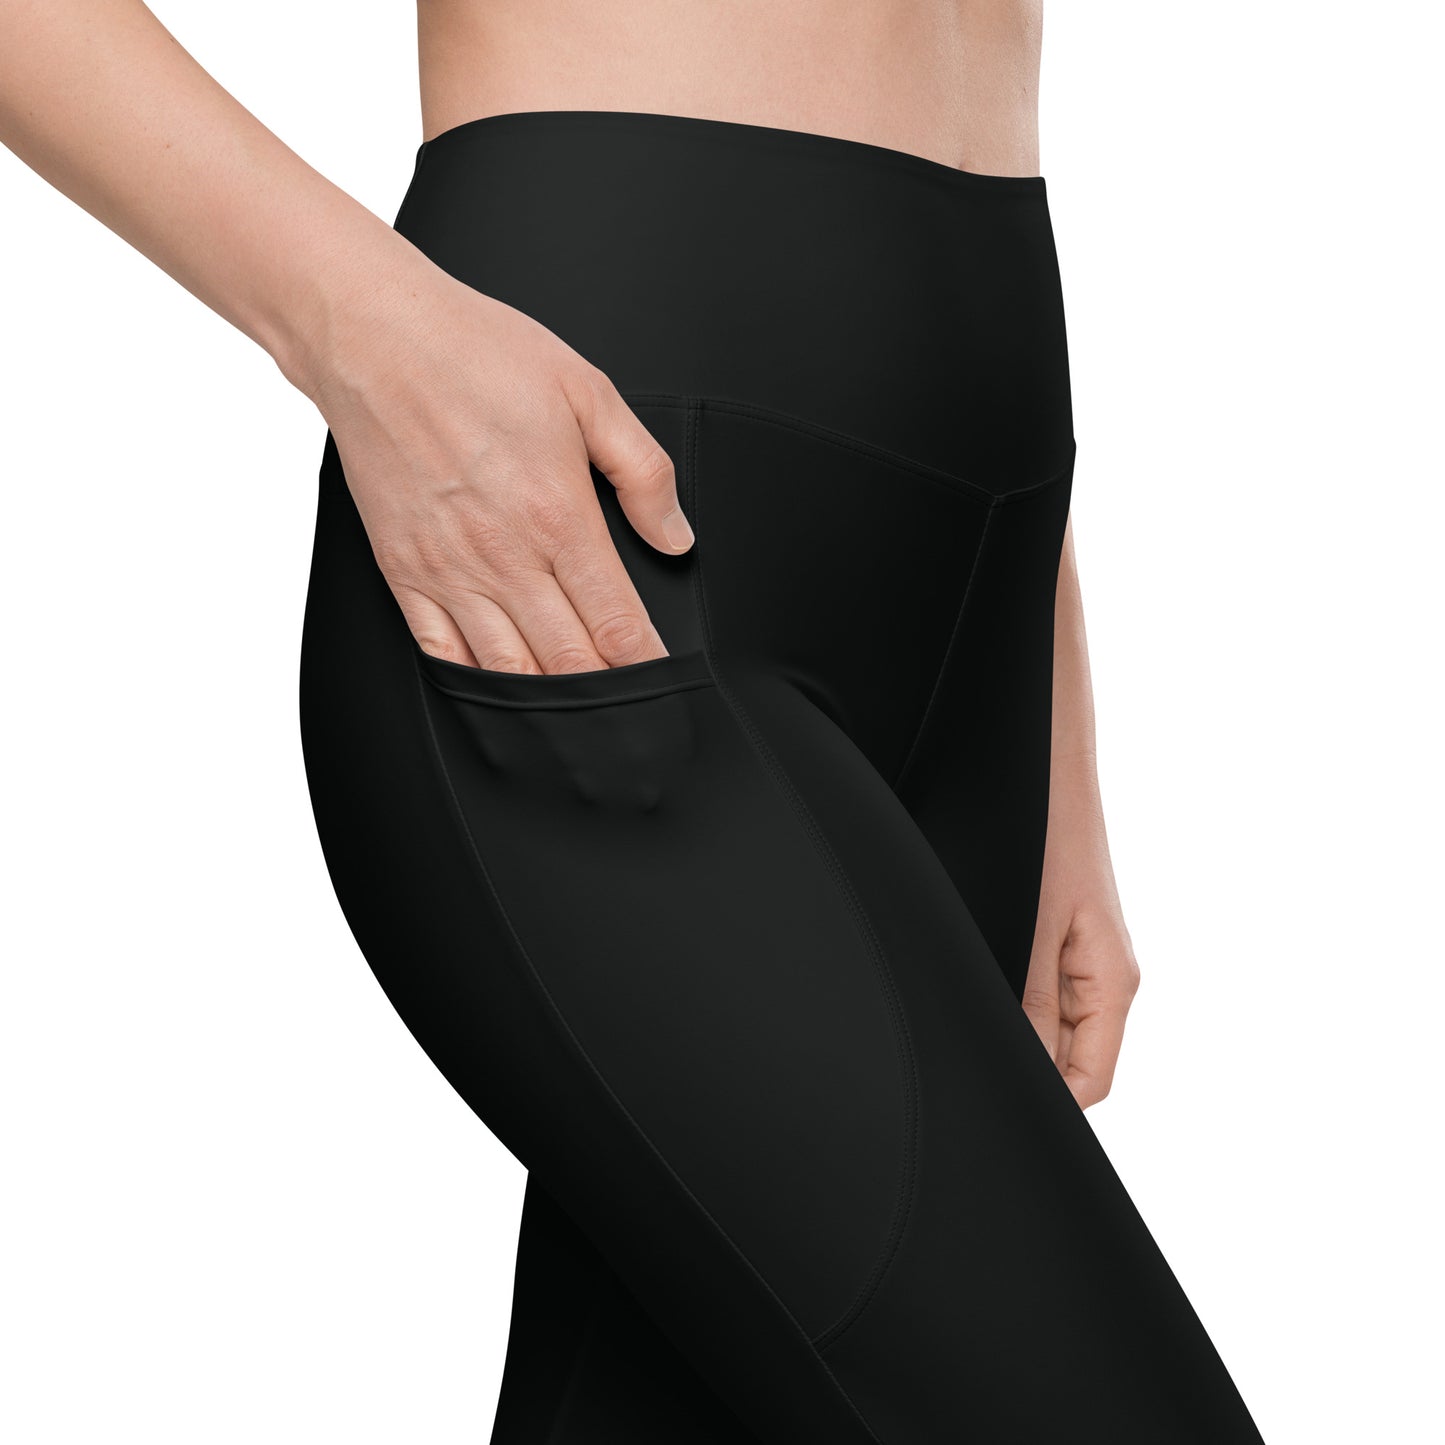 Leggings with pockets in solid black